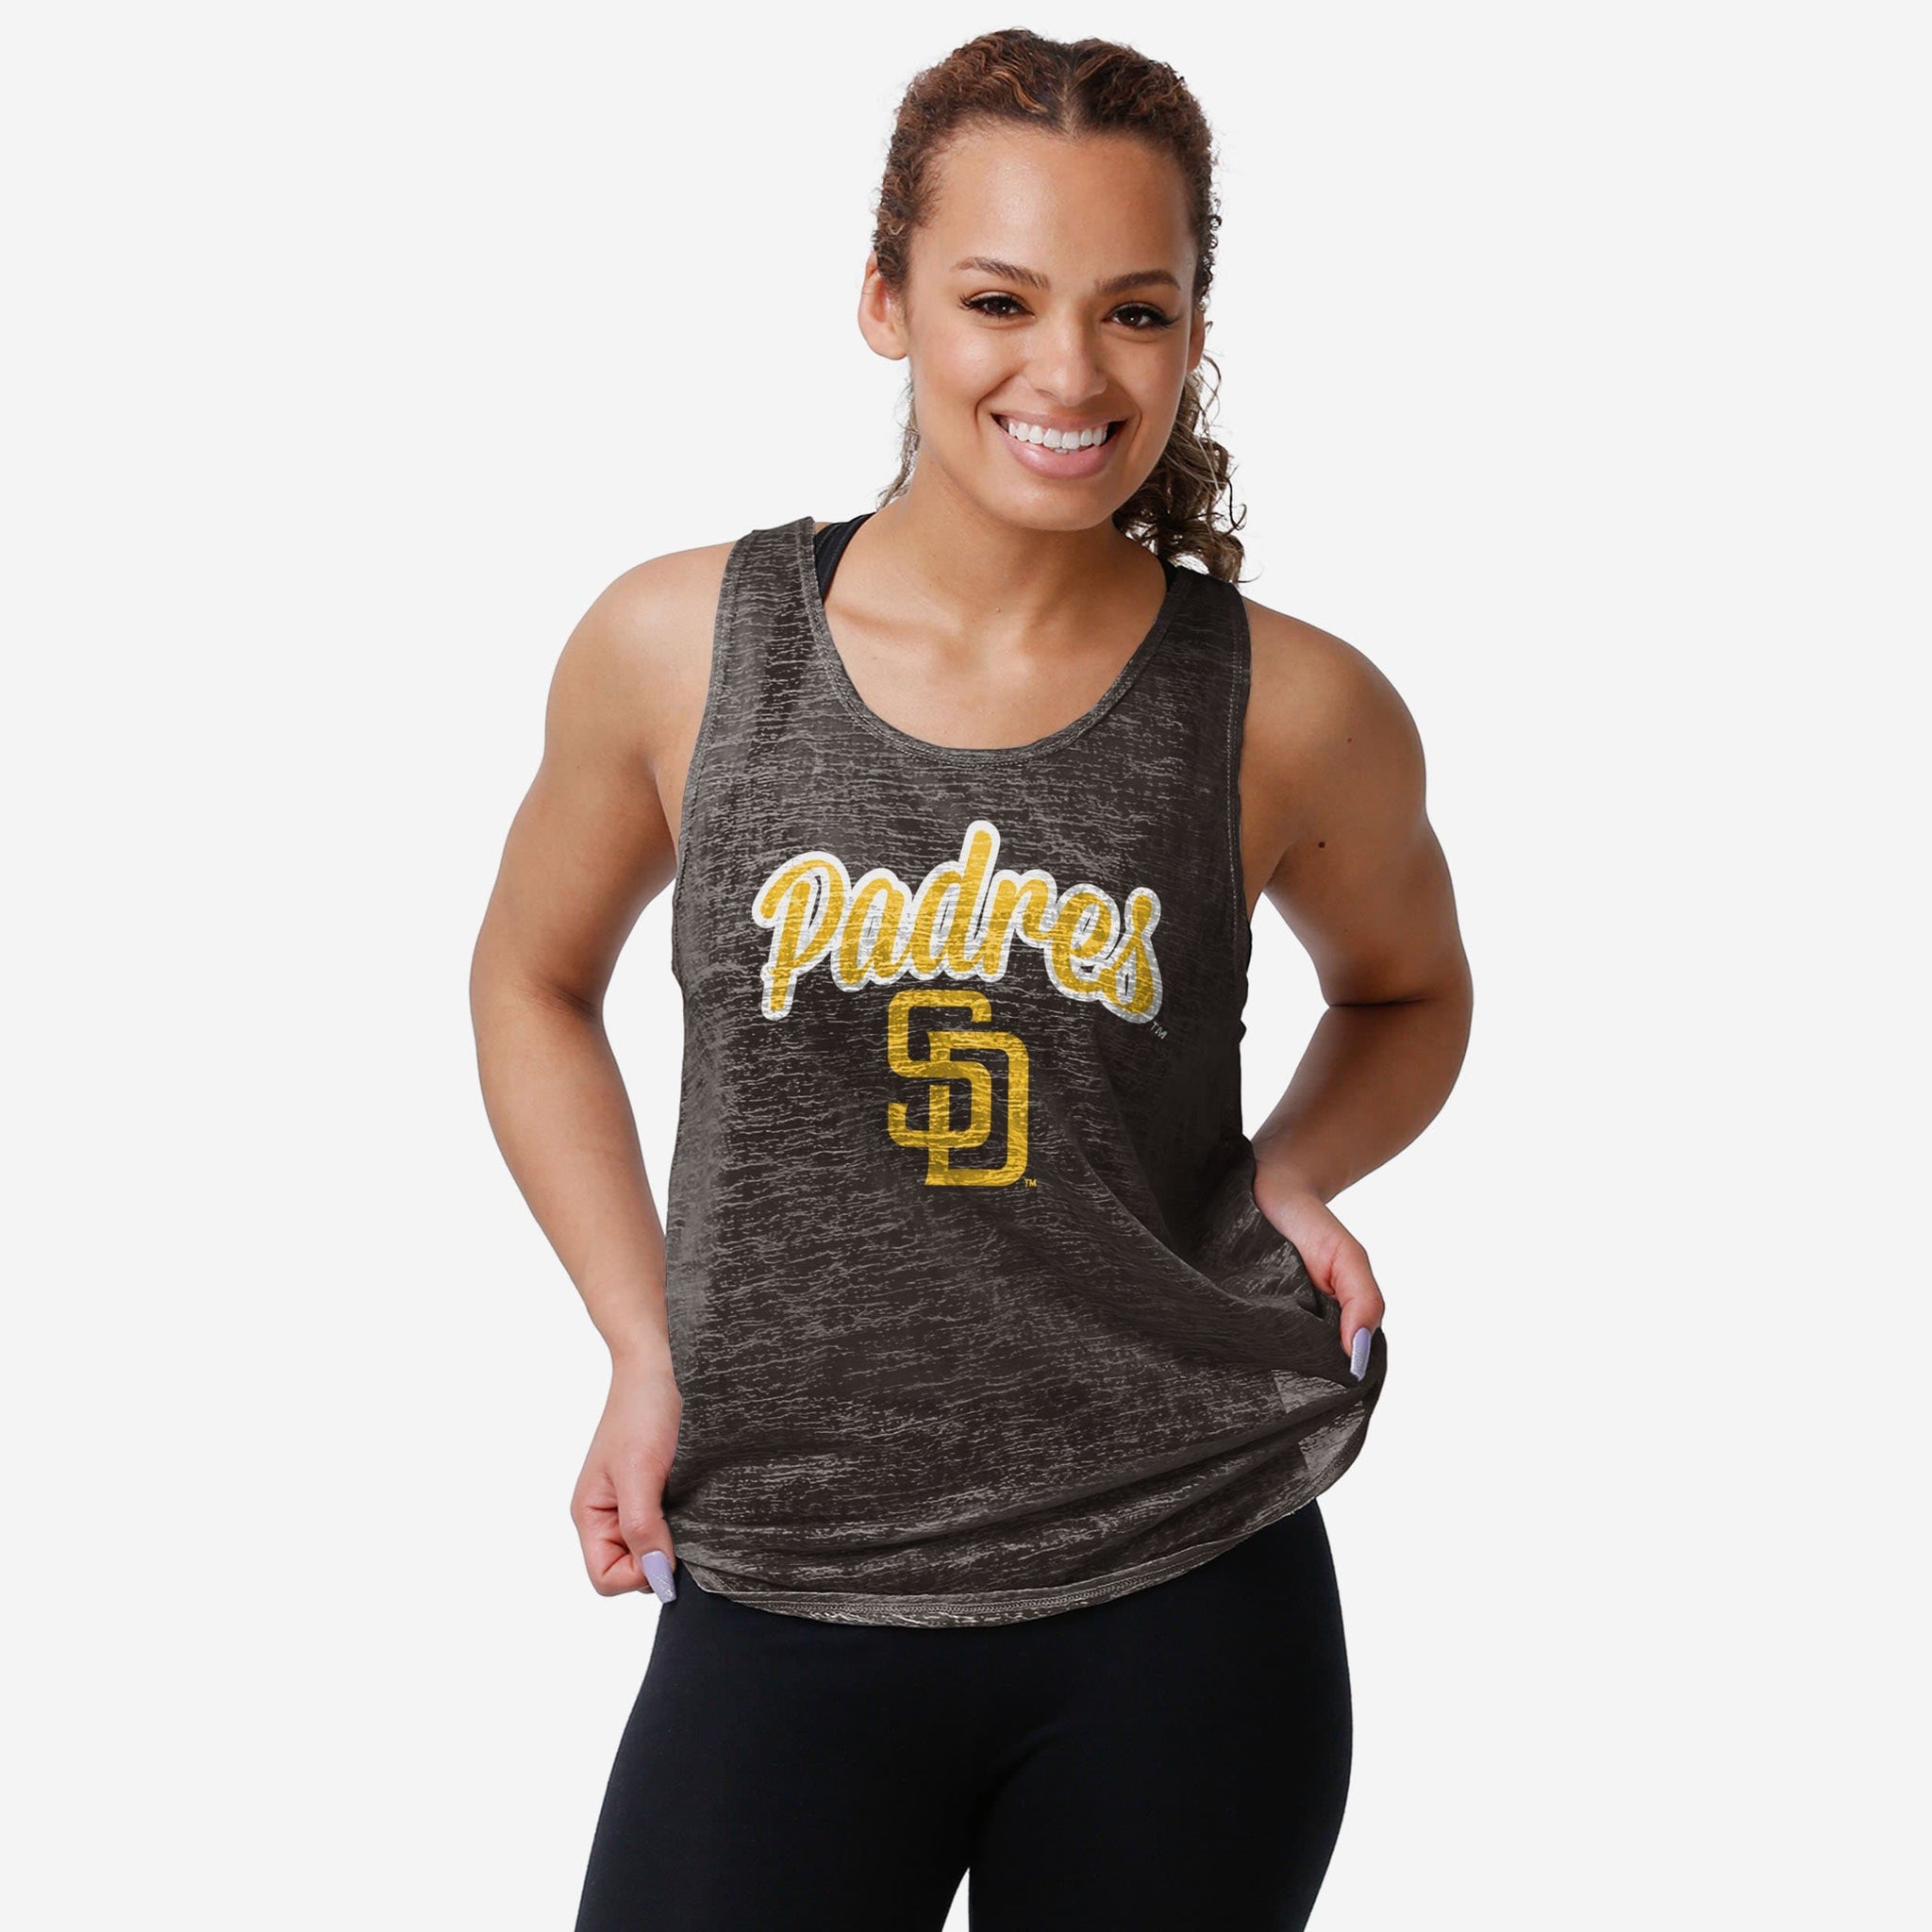 San Diego Padres Womens Burn Out Sleeveless Top